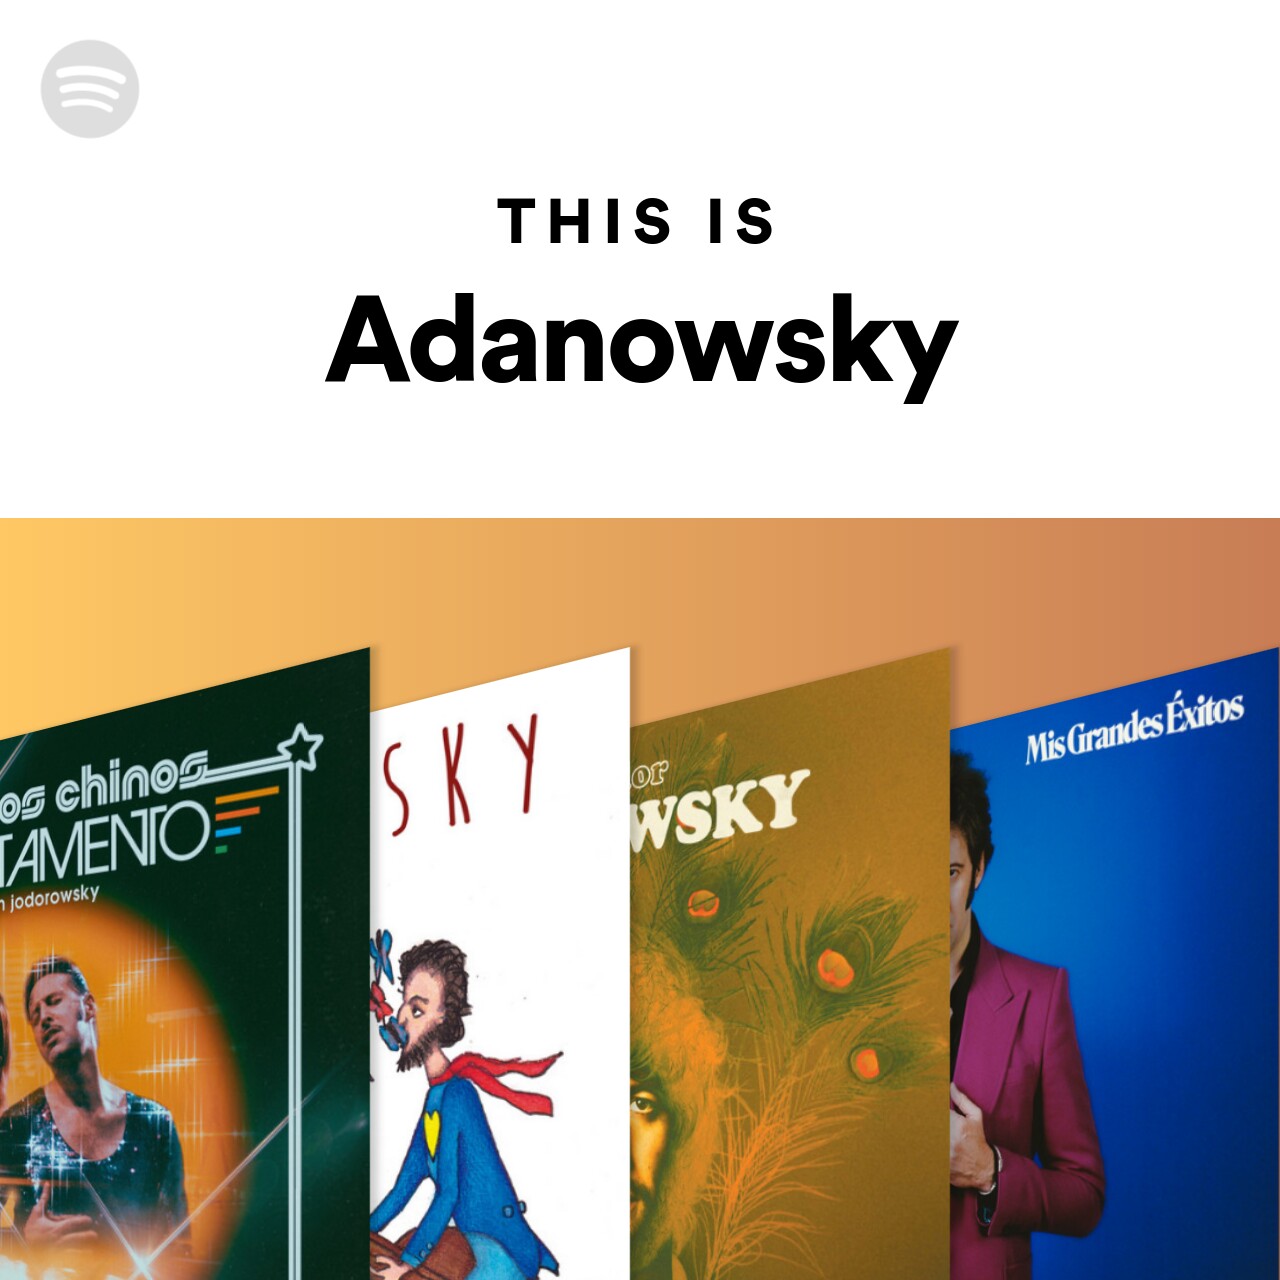 This Is Adanowsky